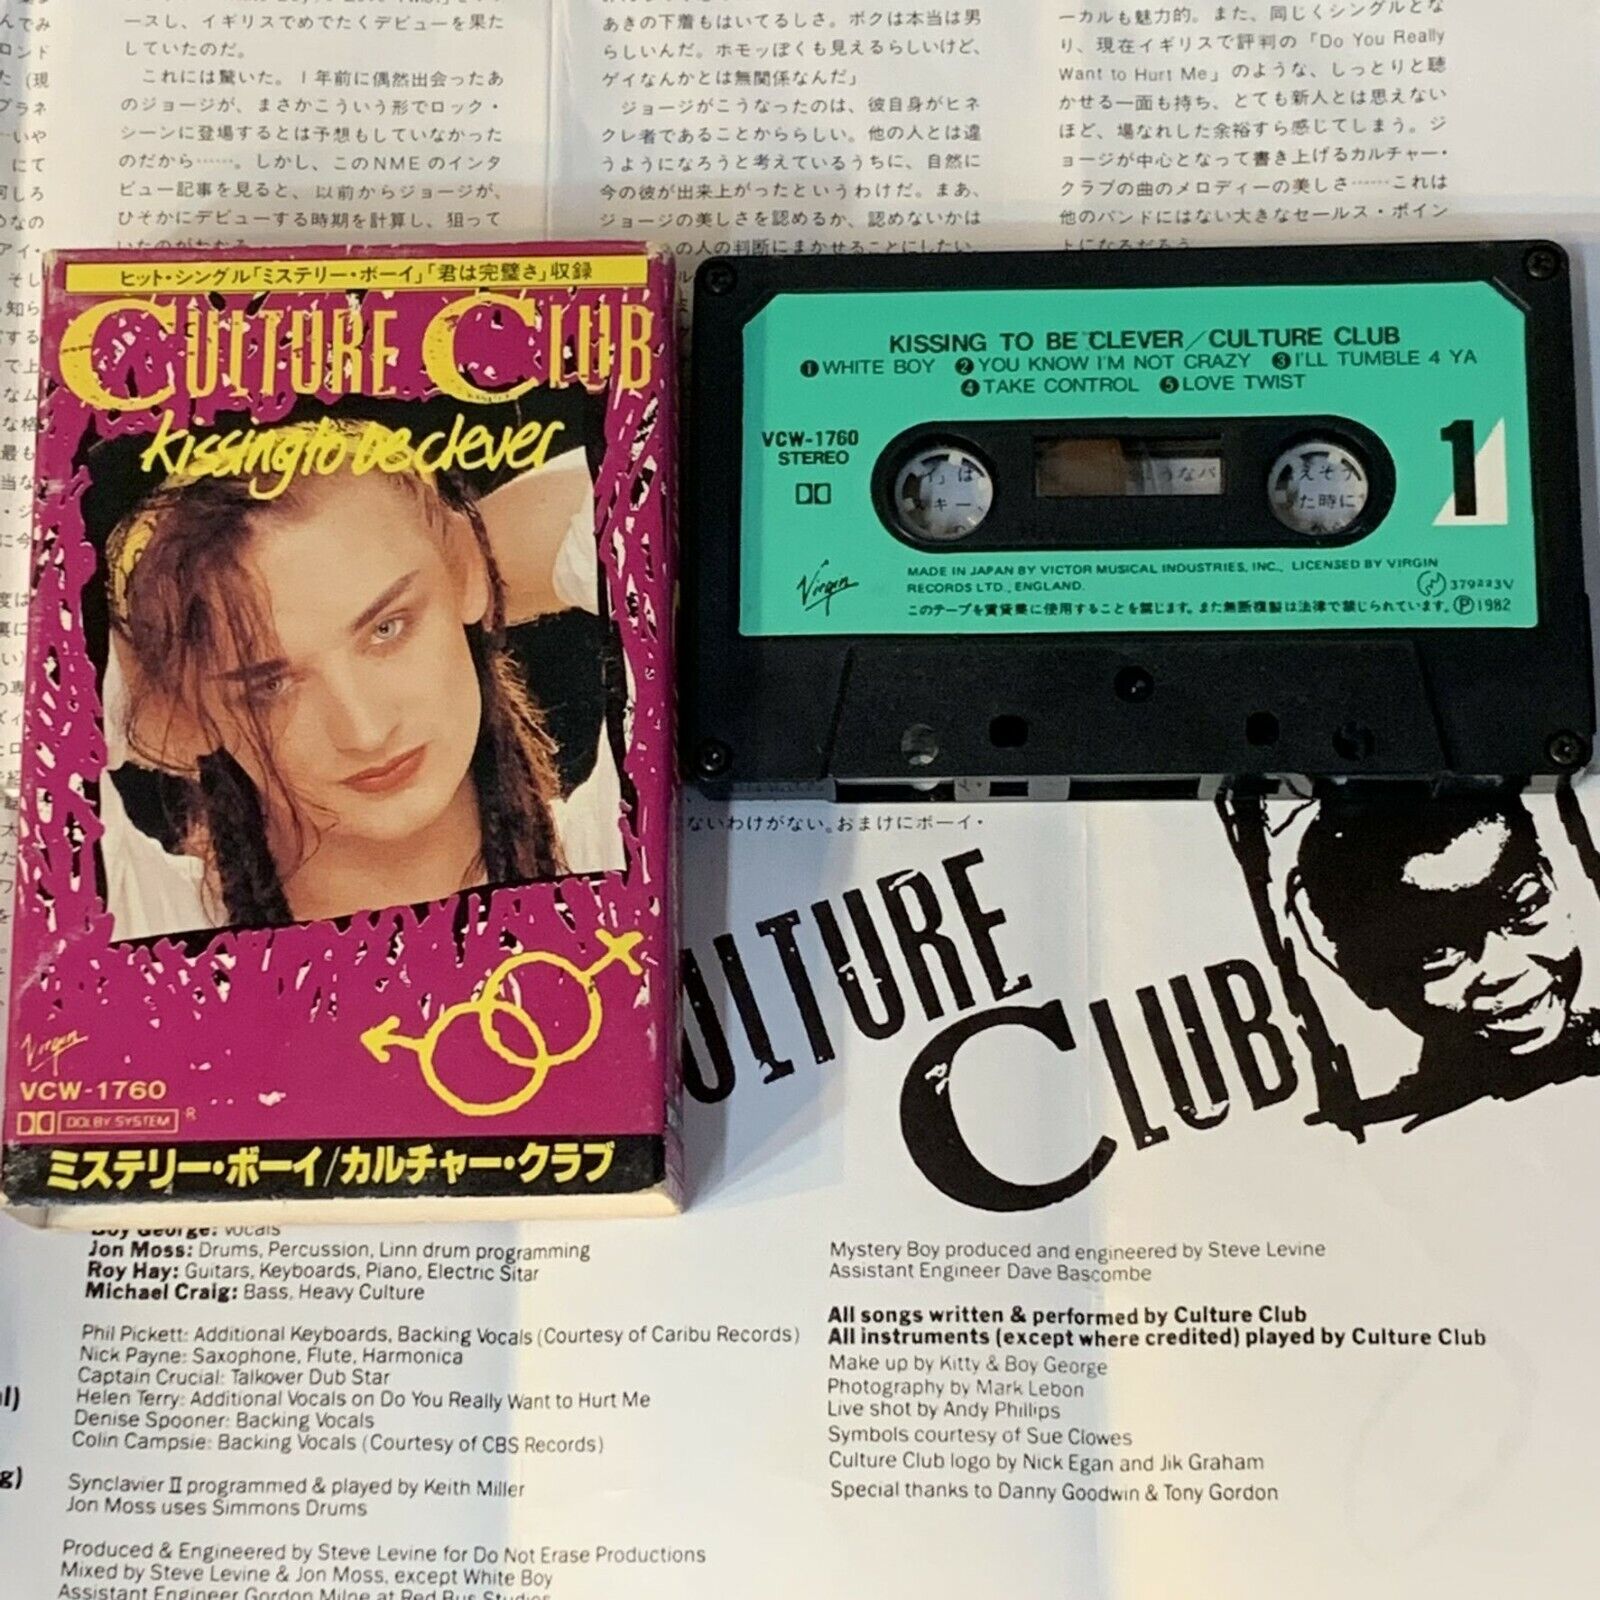 CULTURE CLUB Kissing To Be Clever JAPAN CASSETTE TAPE VCW-1760 w/SLIP CASE FreeS